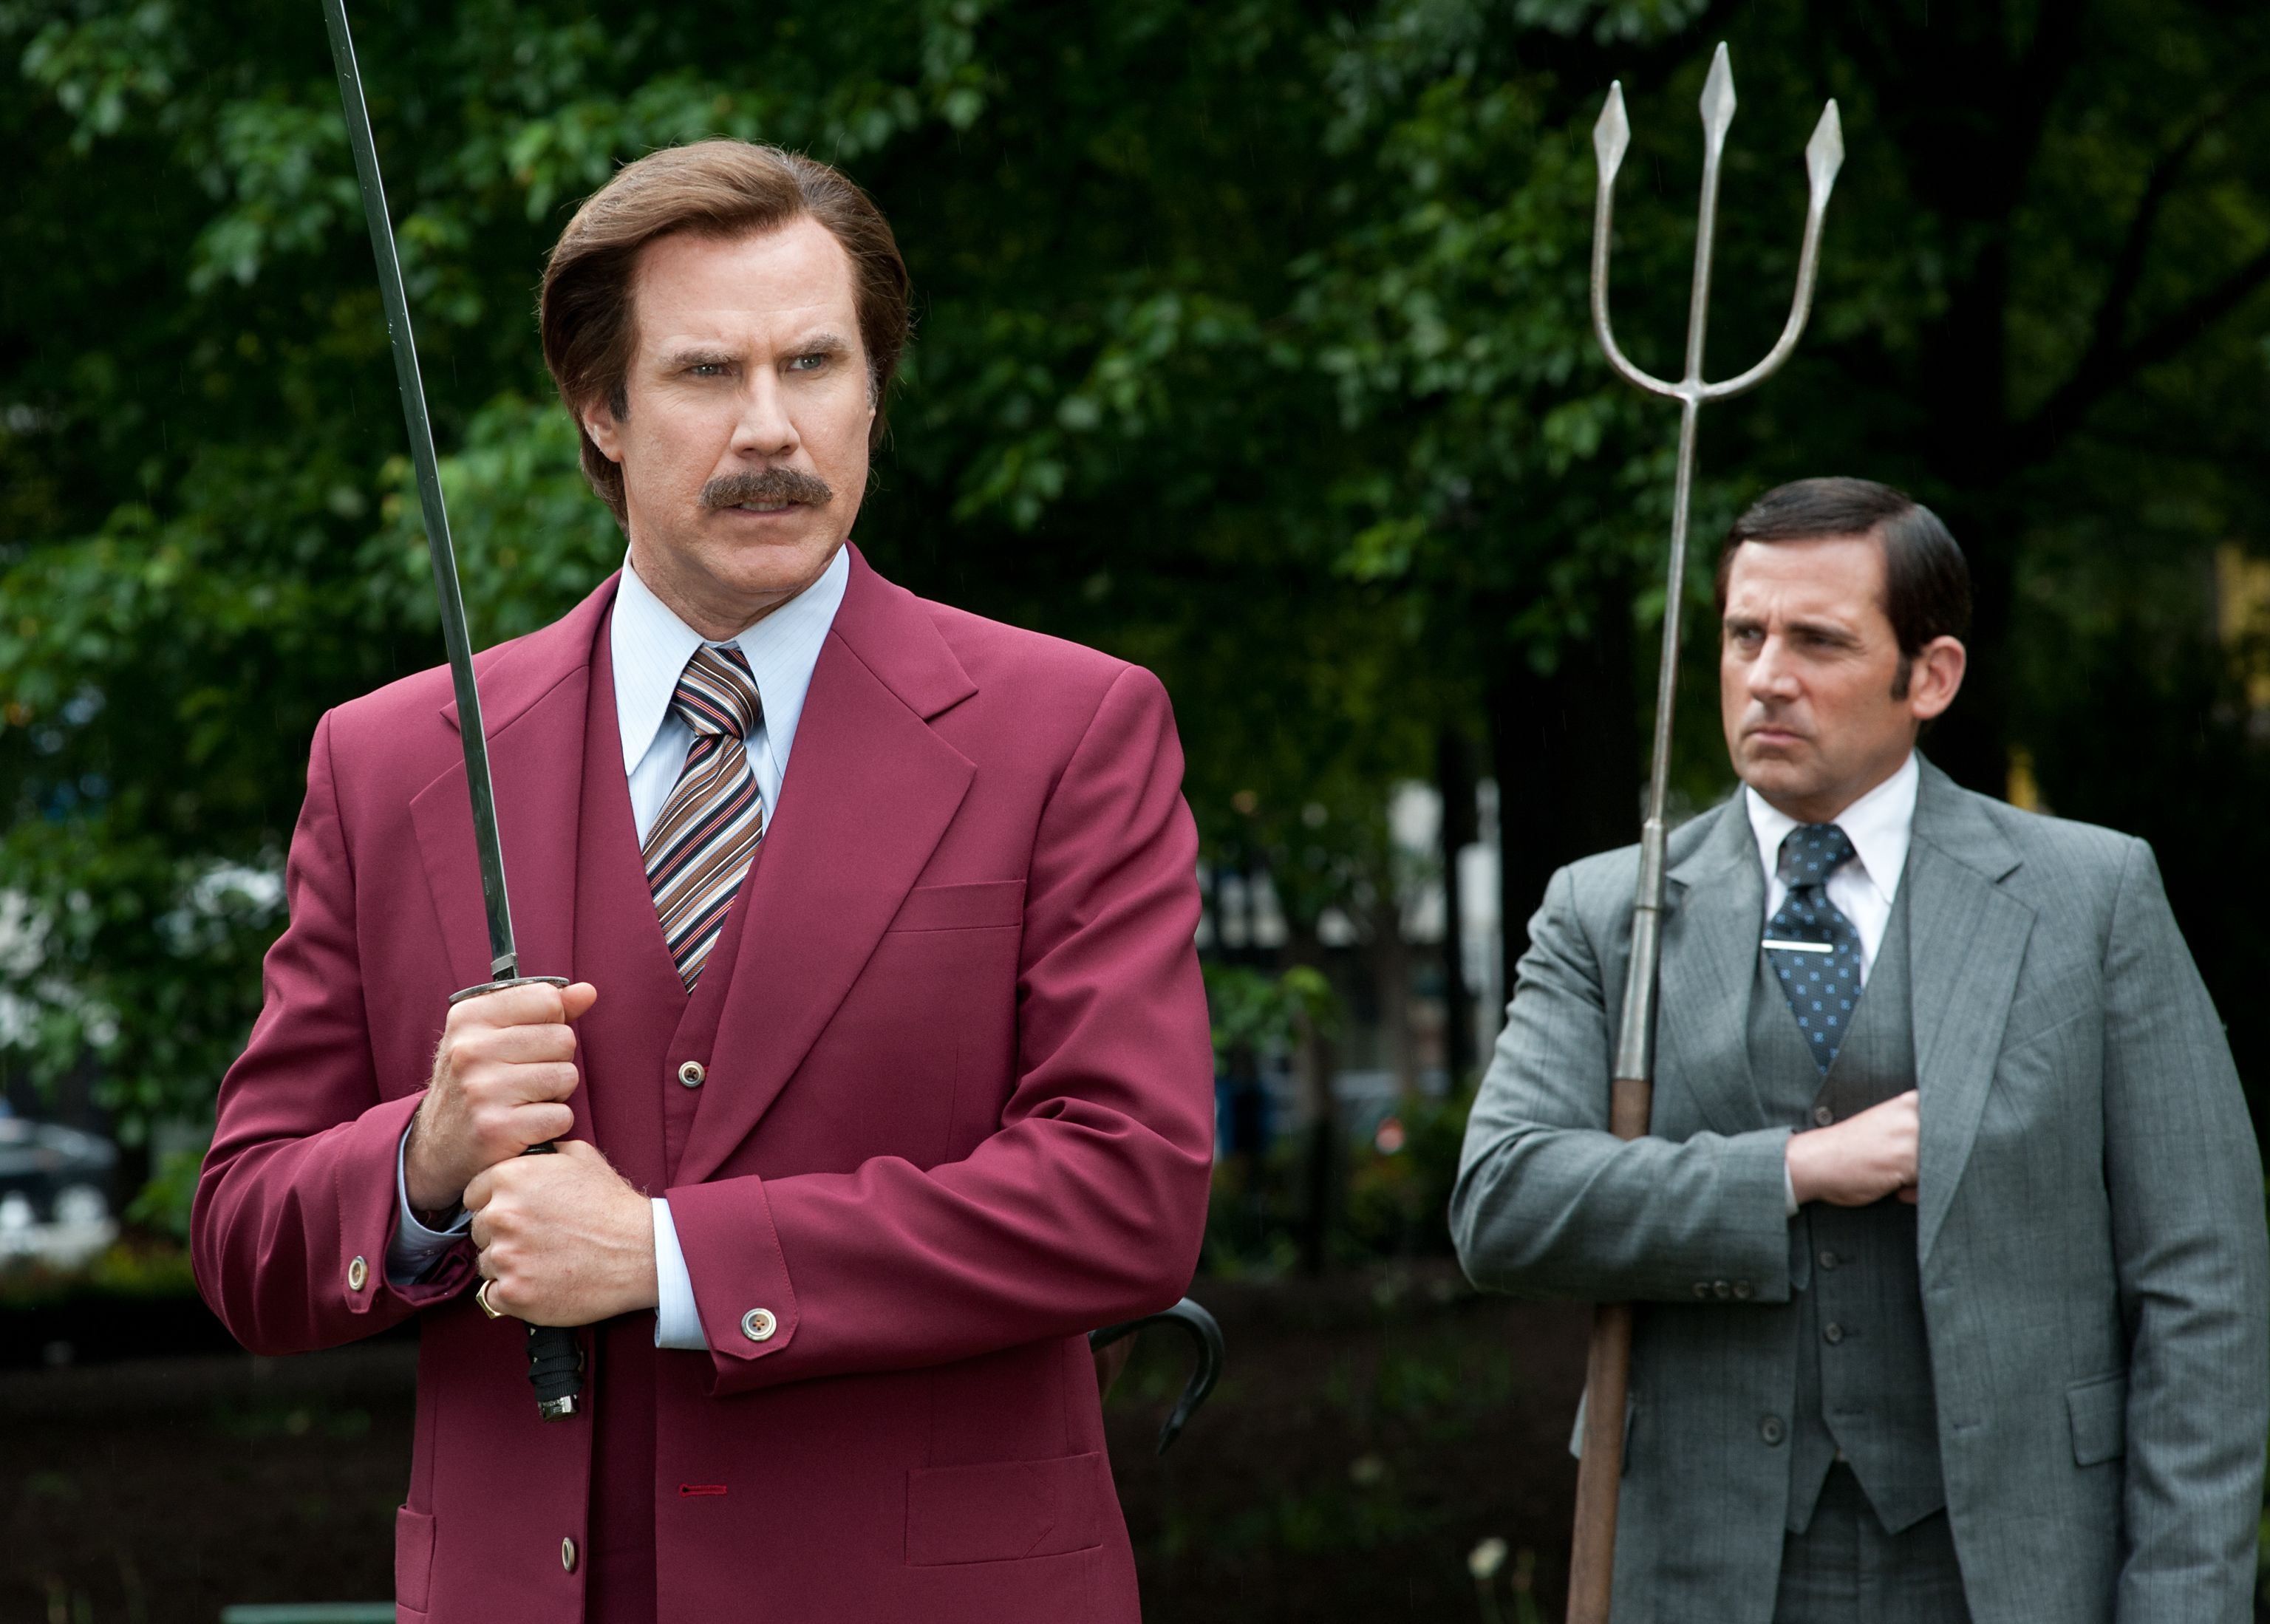 Anchorman: The Legend Continues Photo 1